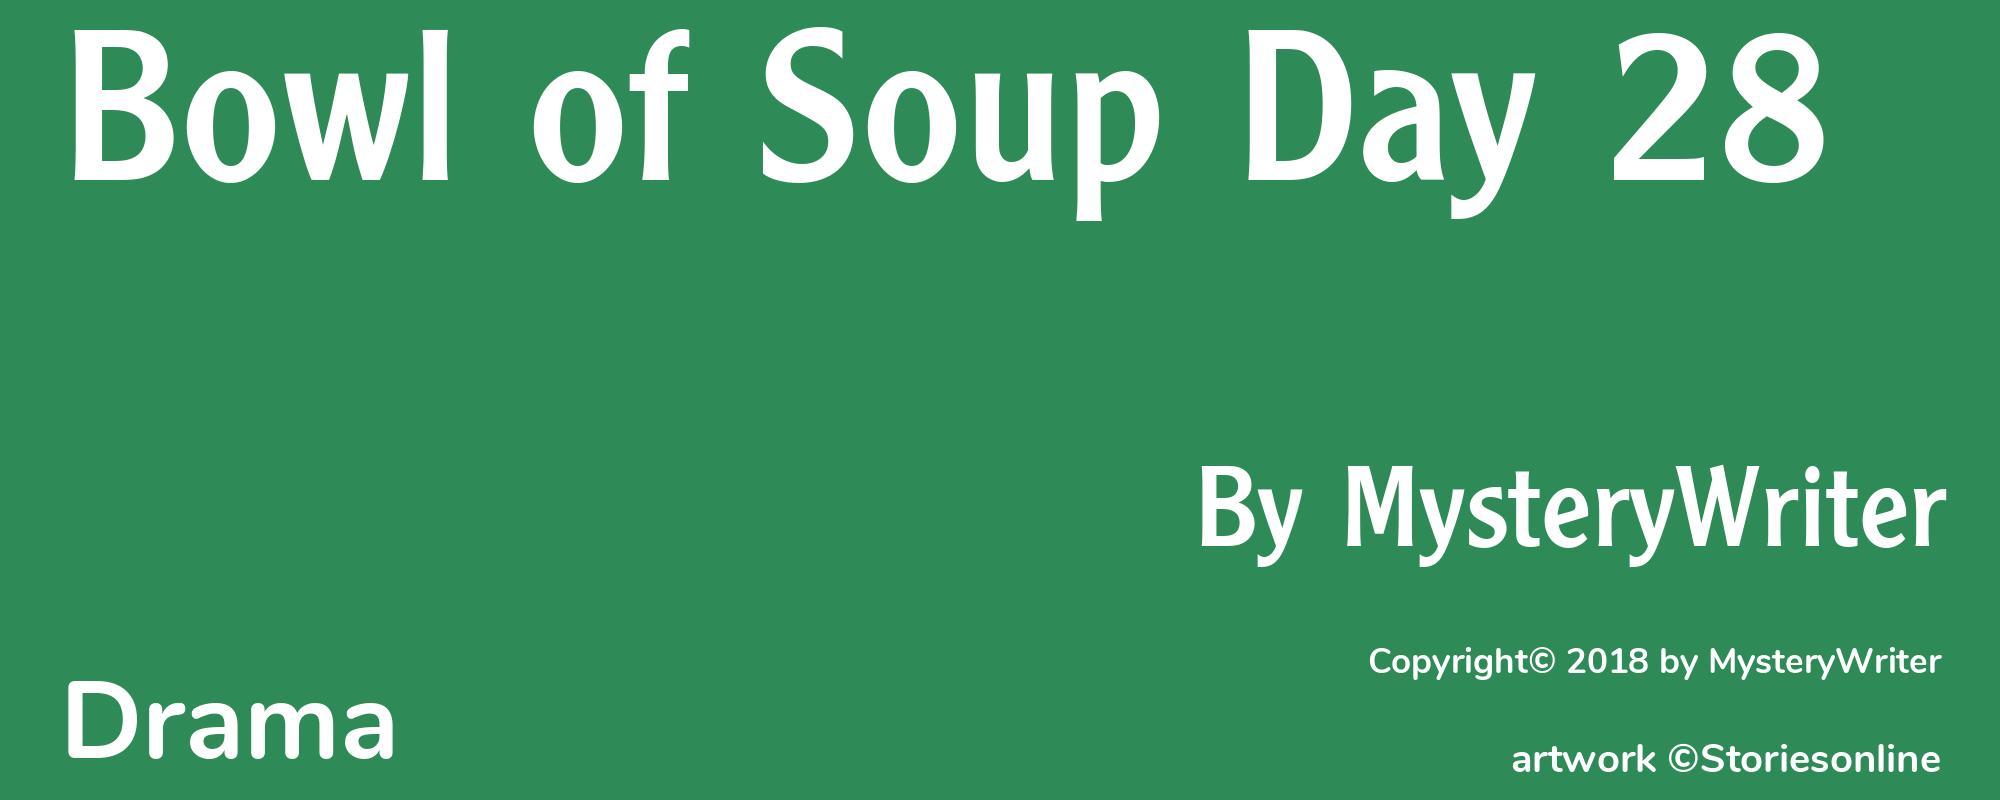 Bowl of Soup Day 28 - Cover